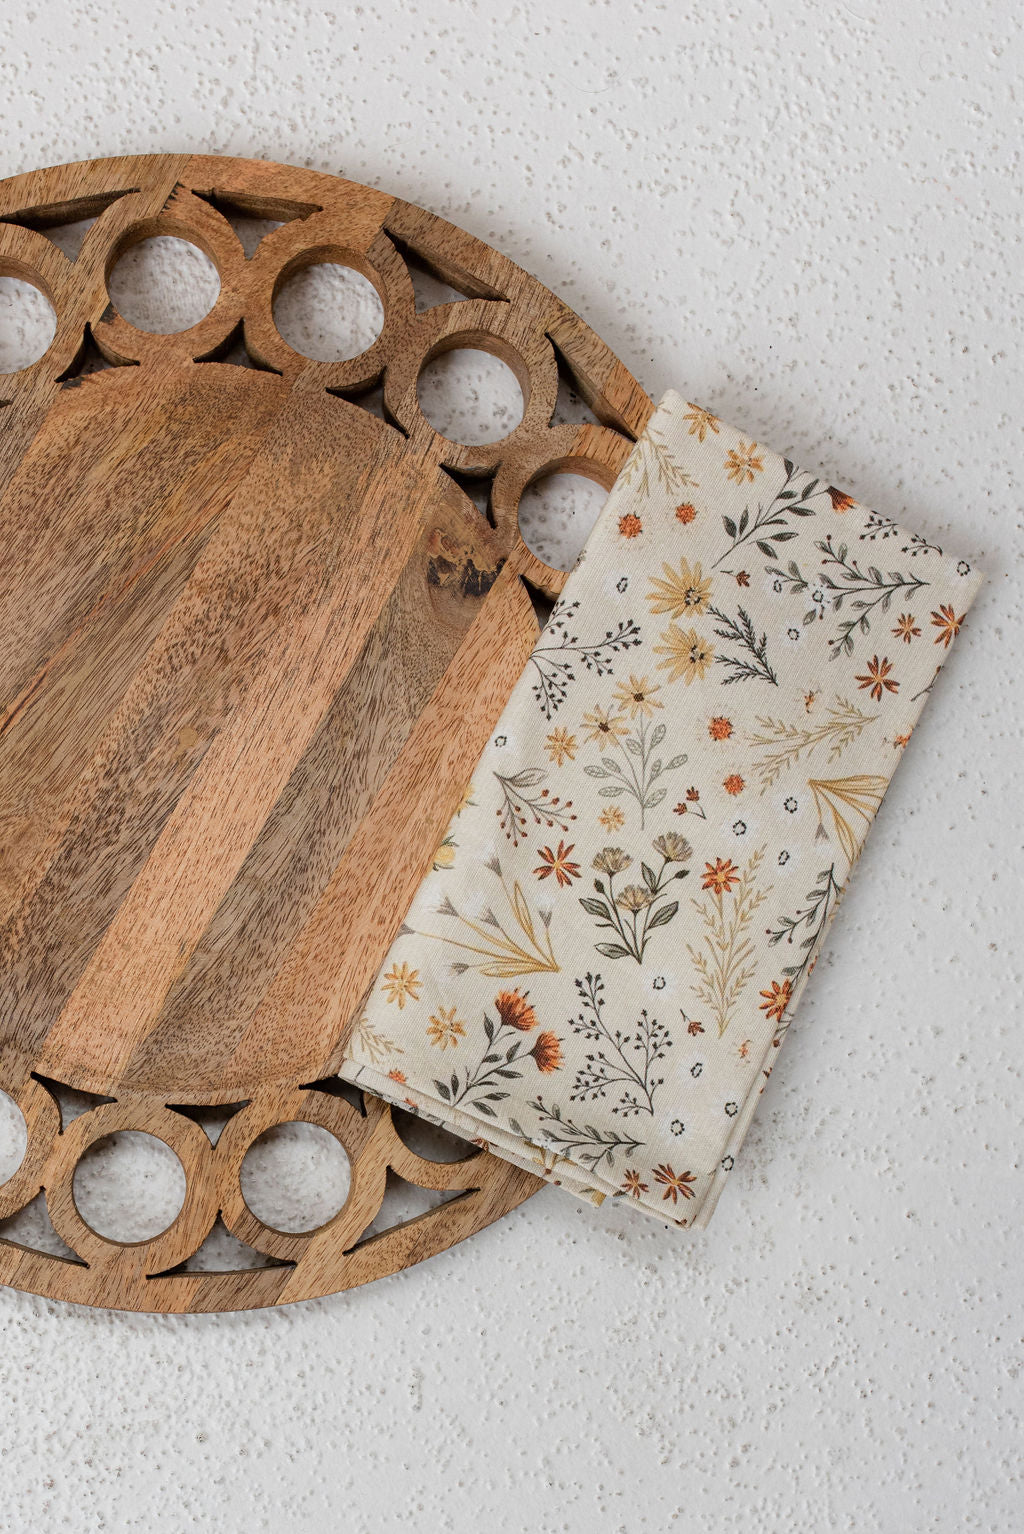 modern circular wooden tray with fall meadow napkin placed ontop